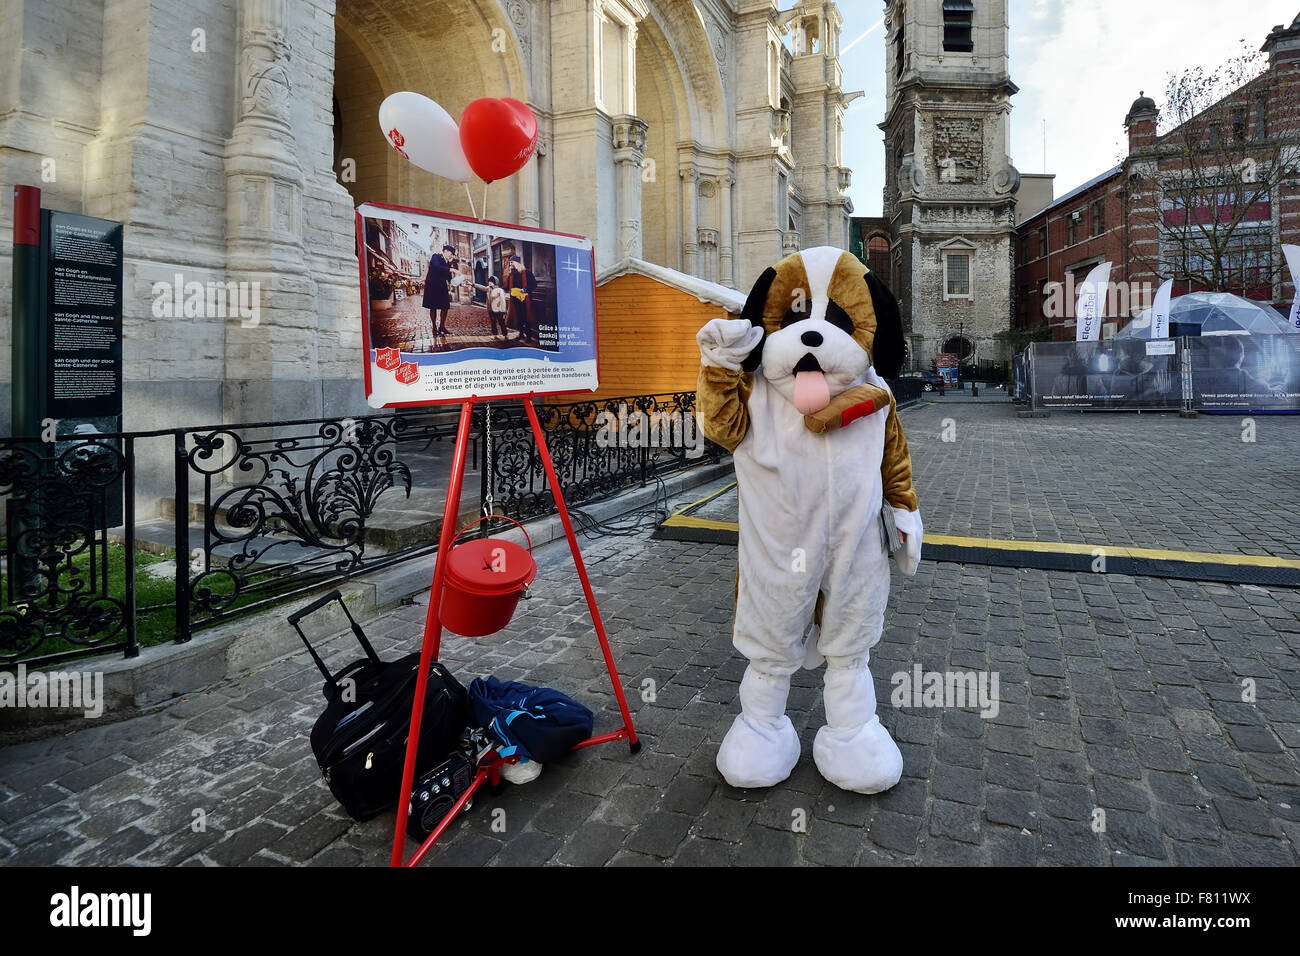 Brussels, Belgium. 3rd December, 2015. Representative of Salvation Army in Brussels collects donations during Christmas Market season on 3 December 2015 in Brussels, Belgium Credit:  Skyfish/Alamy Live News Stock Photo